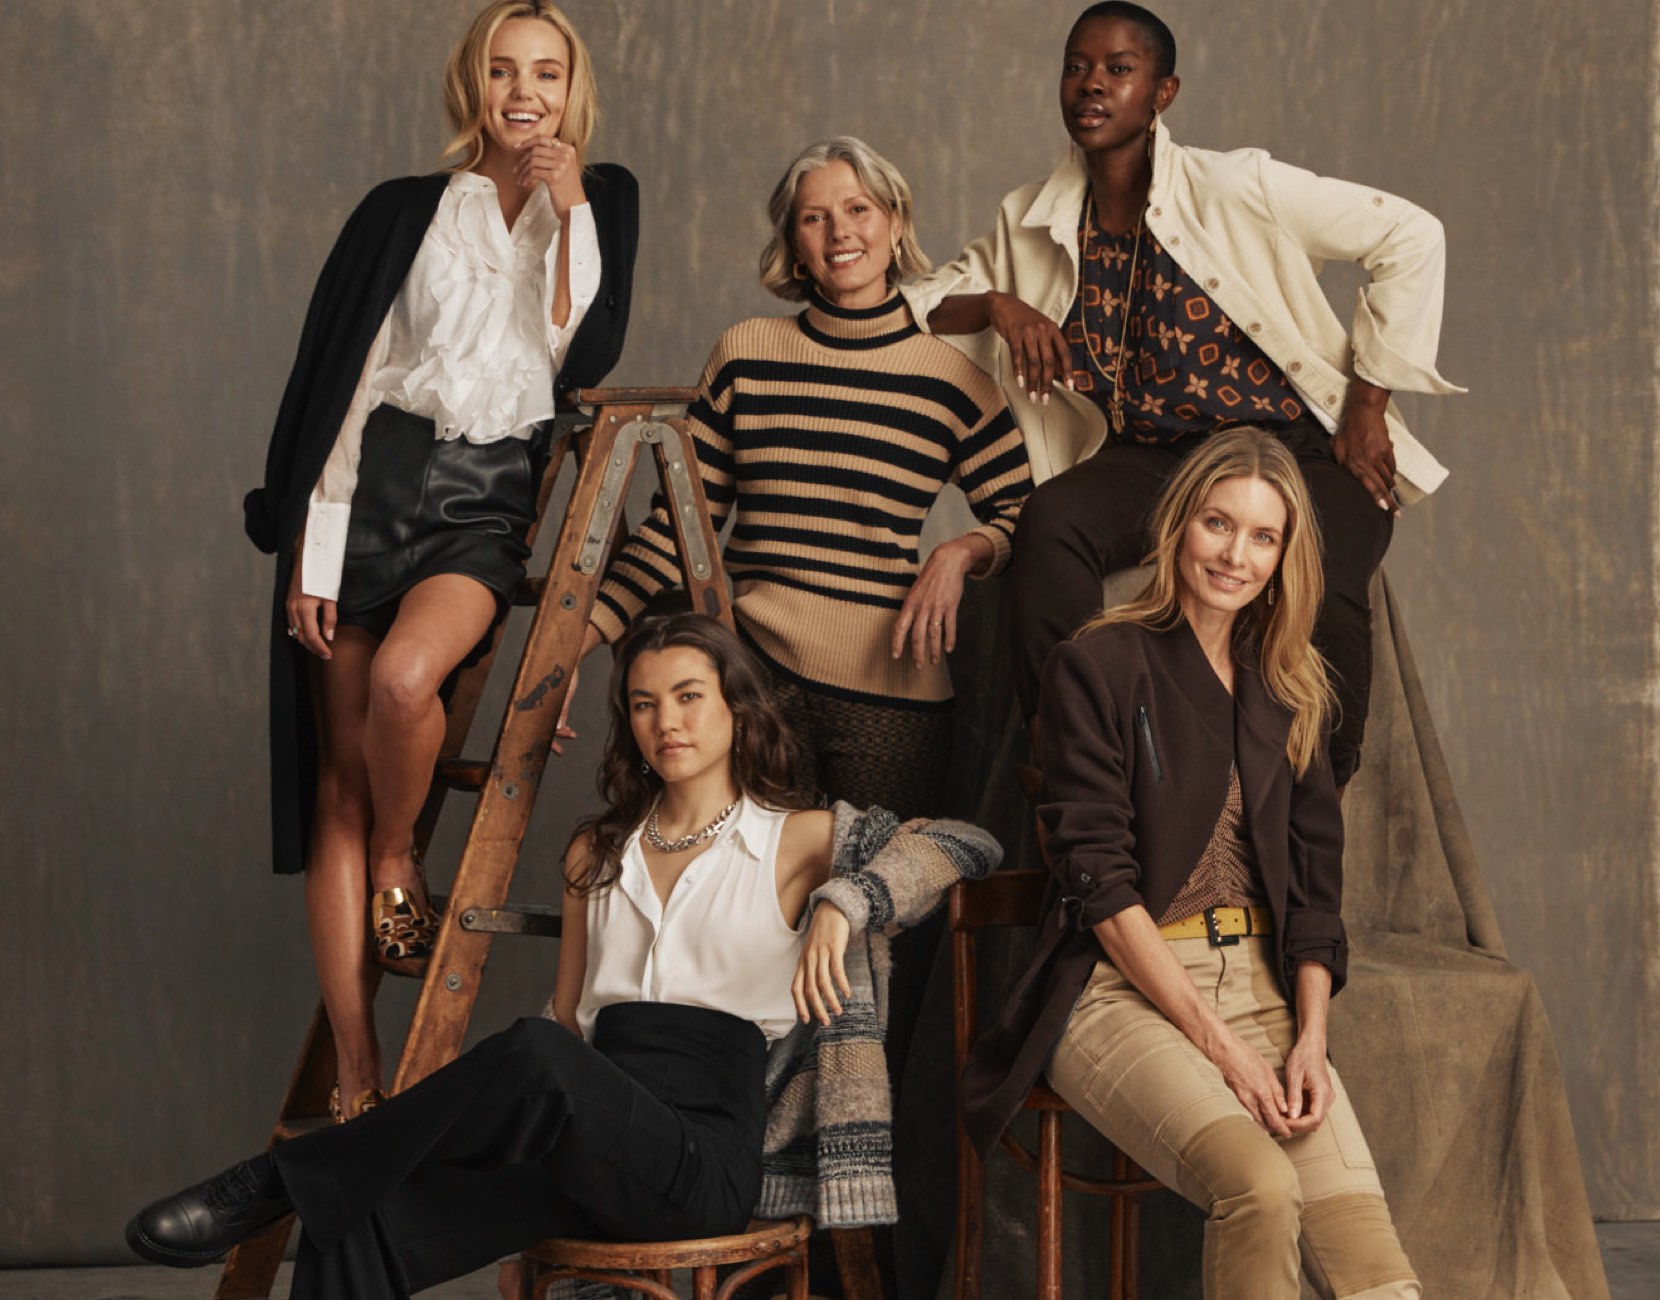 Models modeling the Fall 2023 Collection. First model is wearing Noble Blouse in White, Jett Skort in Black, James Jacket in Black. Second model is wearing Polo Turtleneck in Black and Cream and Director Trouser in Multi. Third model is wearing Louis Top in Medallion Print, Scout Jacket in Bone, and Compass Pant in Dark Chocolate. Fourth model is wearing Poetry Top in White, Boyfriend Cardigan in Multi, and Chargo in Black. Fifth model is wearing Sassy Top in Tile Print, Legacy Topper in Dark Chocolate, and Captain Pant in Khaki.